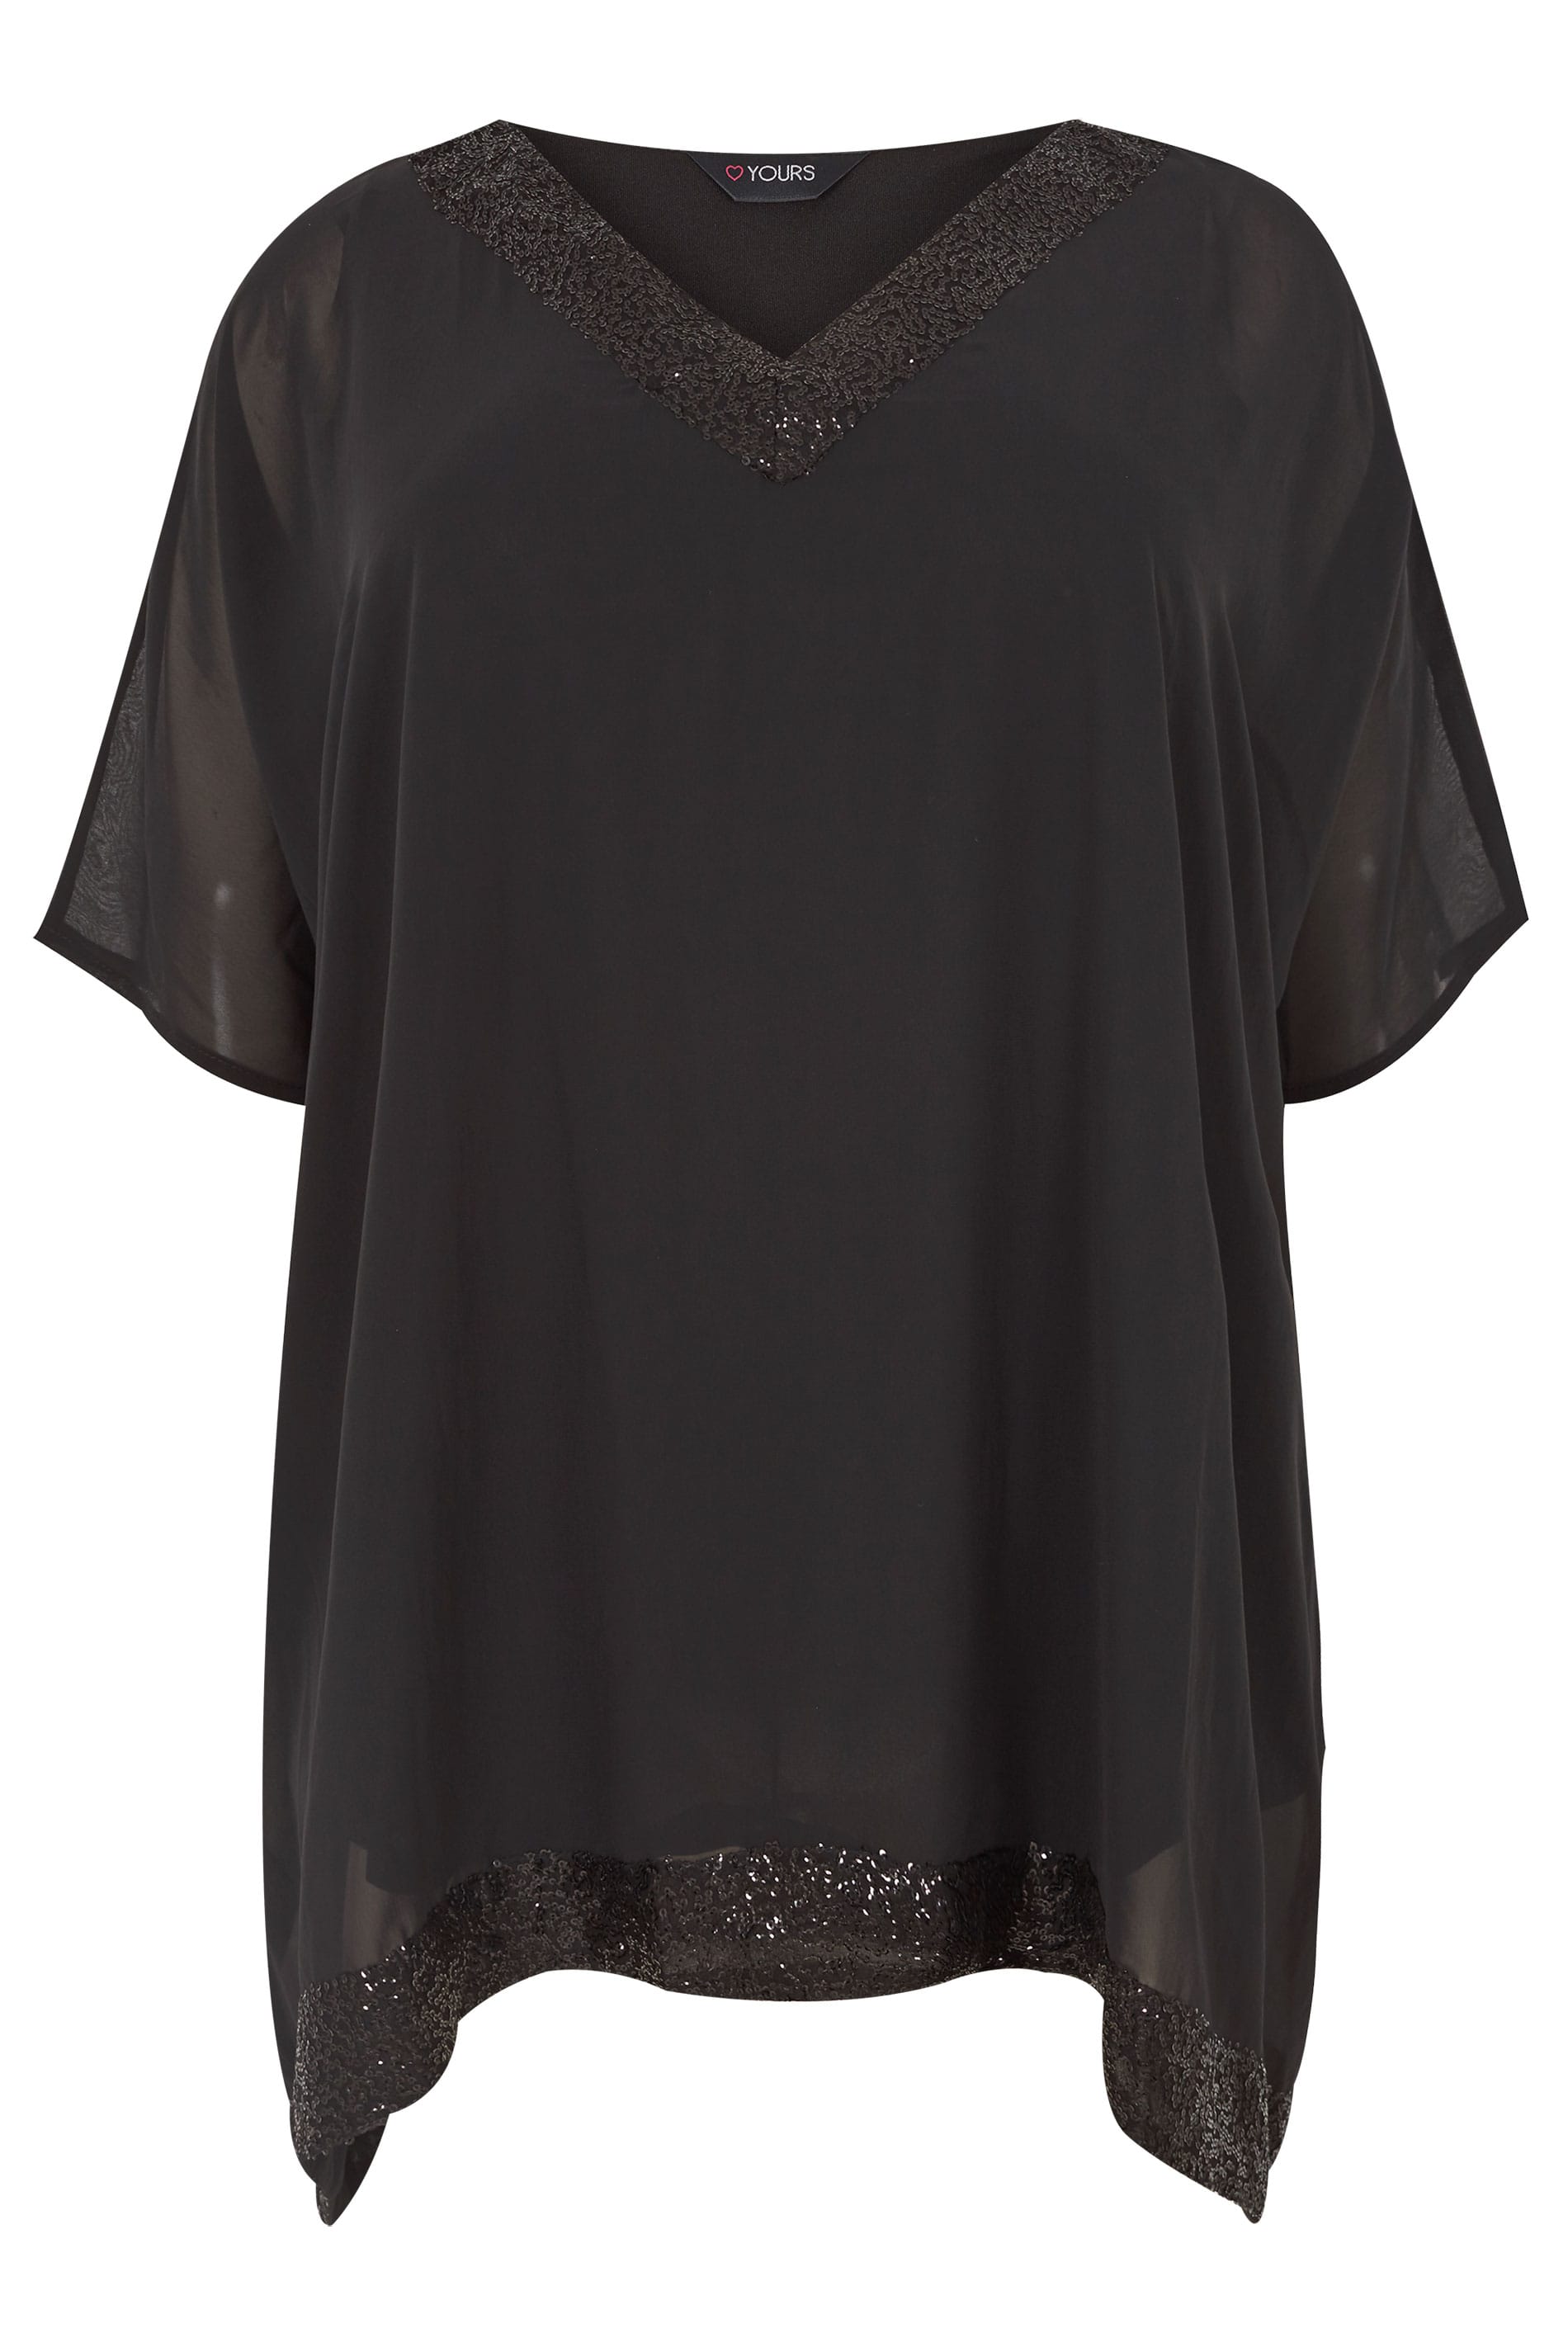 Black Sequin Embellished Cape Top, Plus size 16 to 36